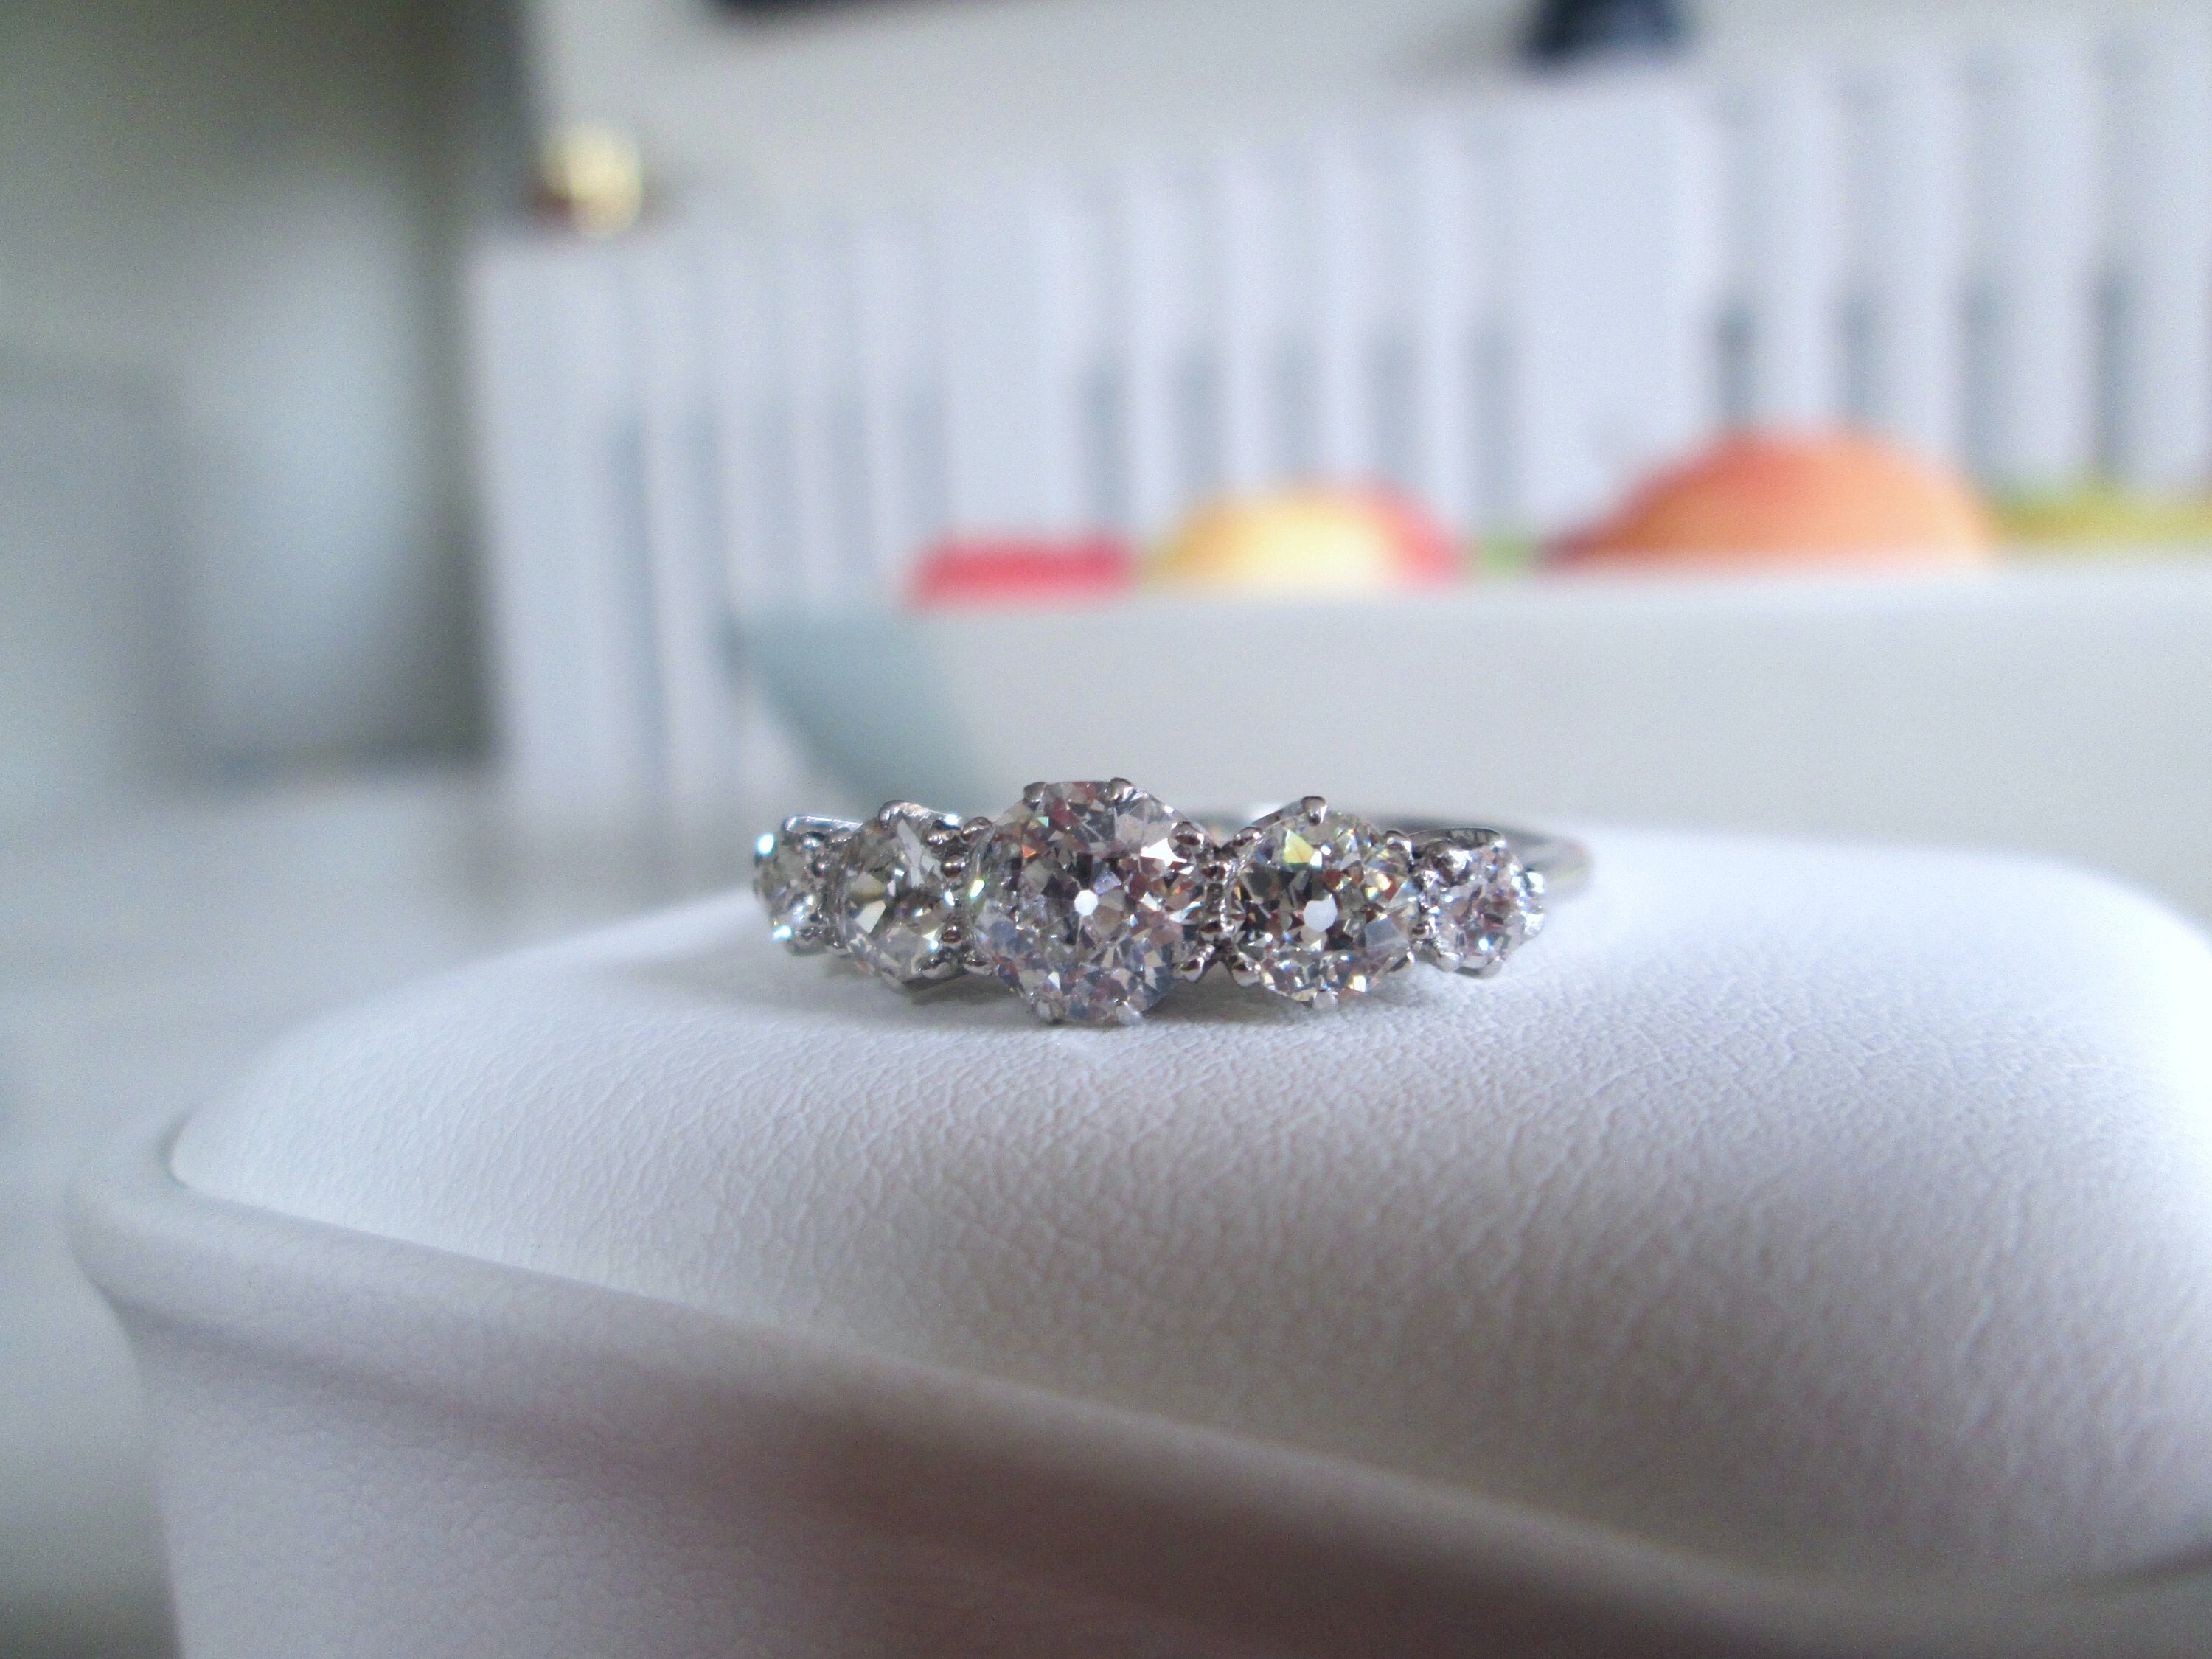 Vintage Size 5 Fashion Ring, This ring is beautiful